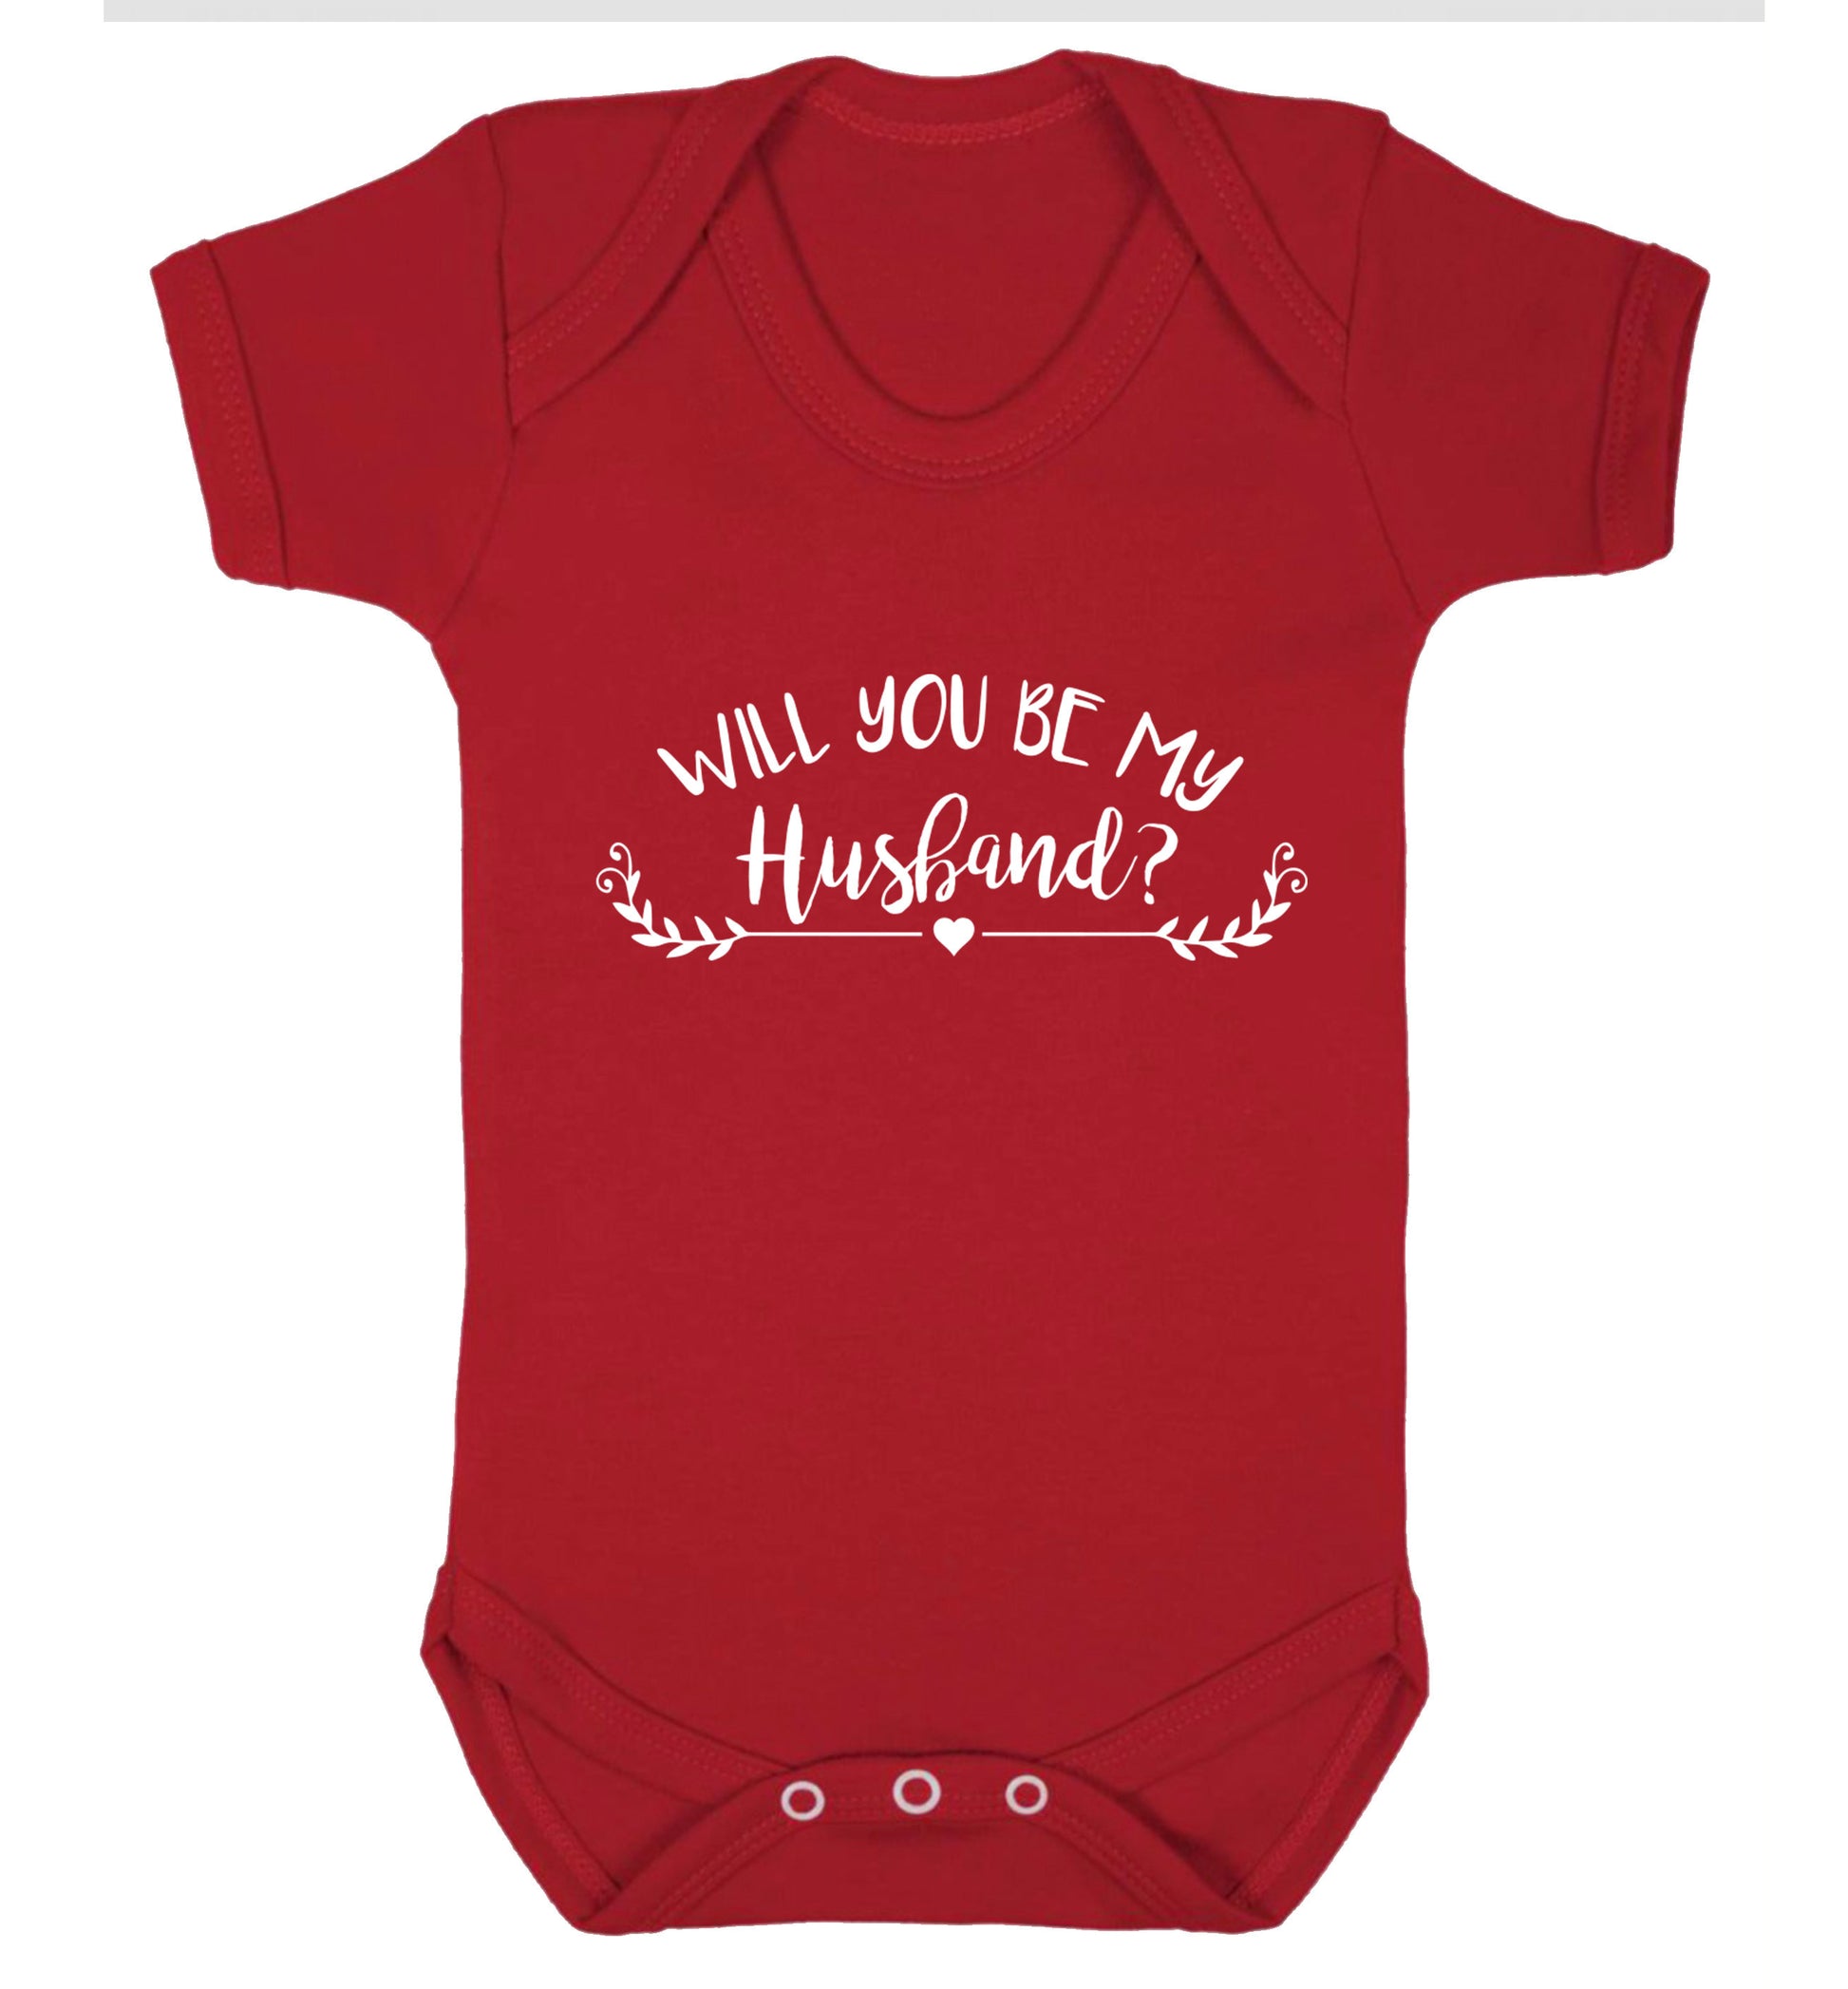 Will you be my husband? Baby Vest red 18-24 months